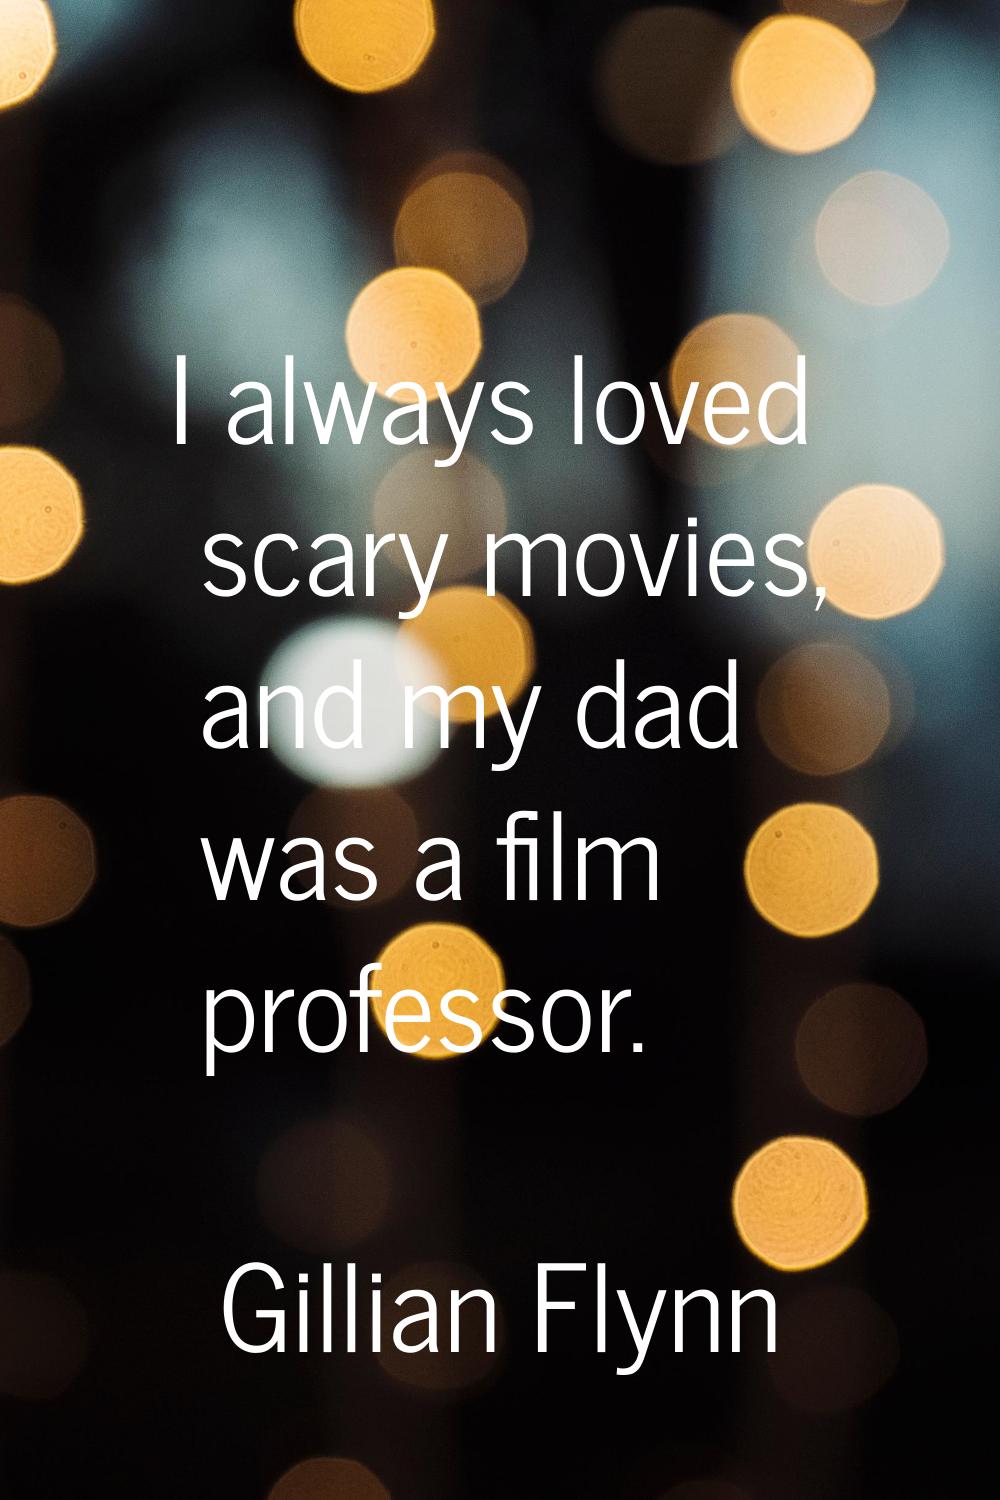 I always loved scary movies, and my dad was a film professor.